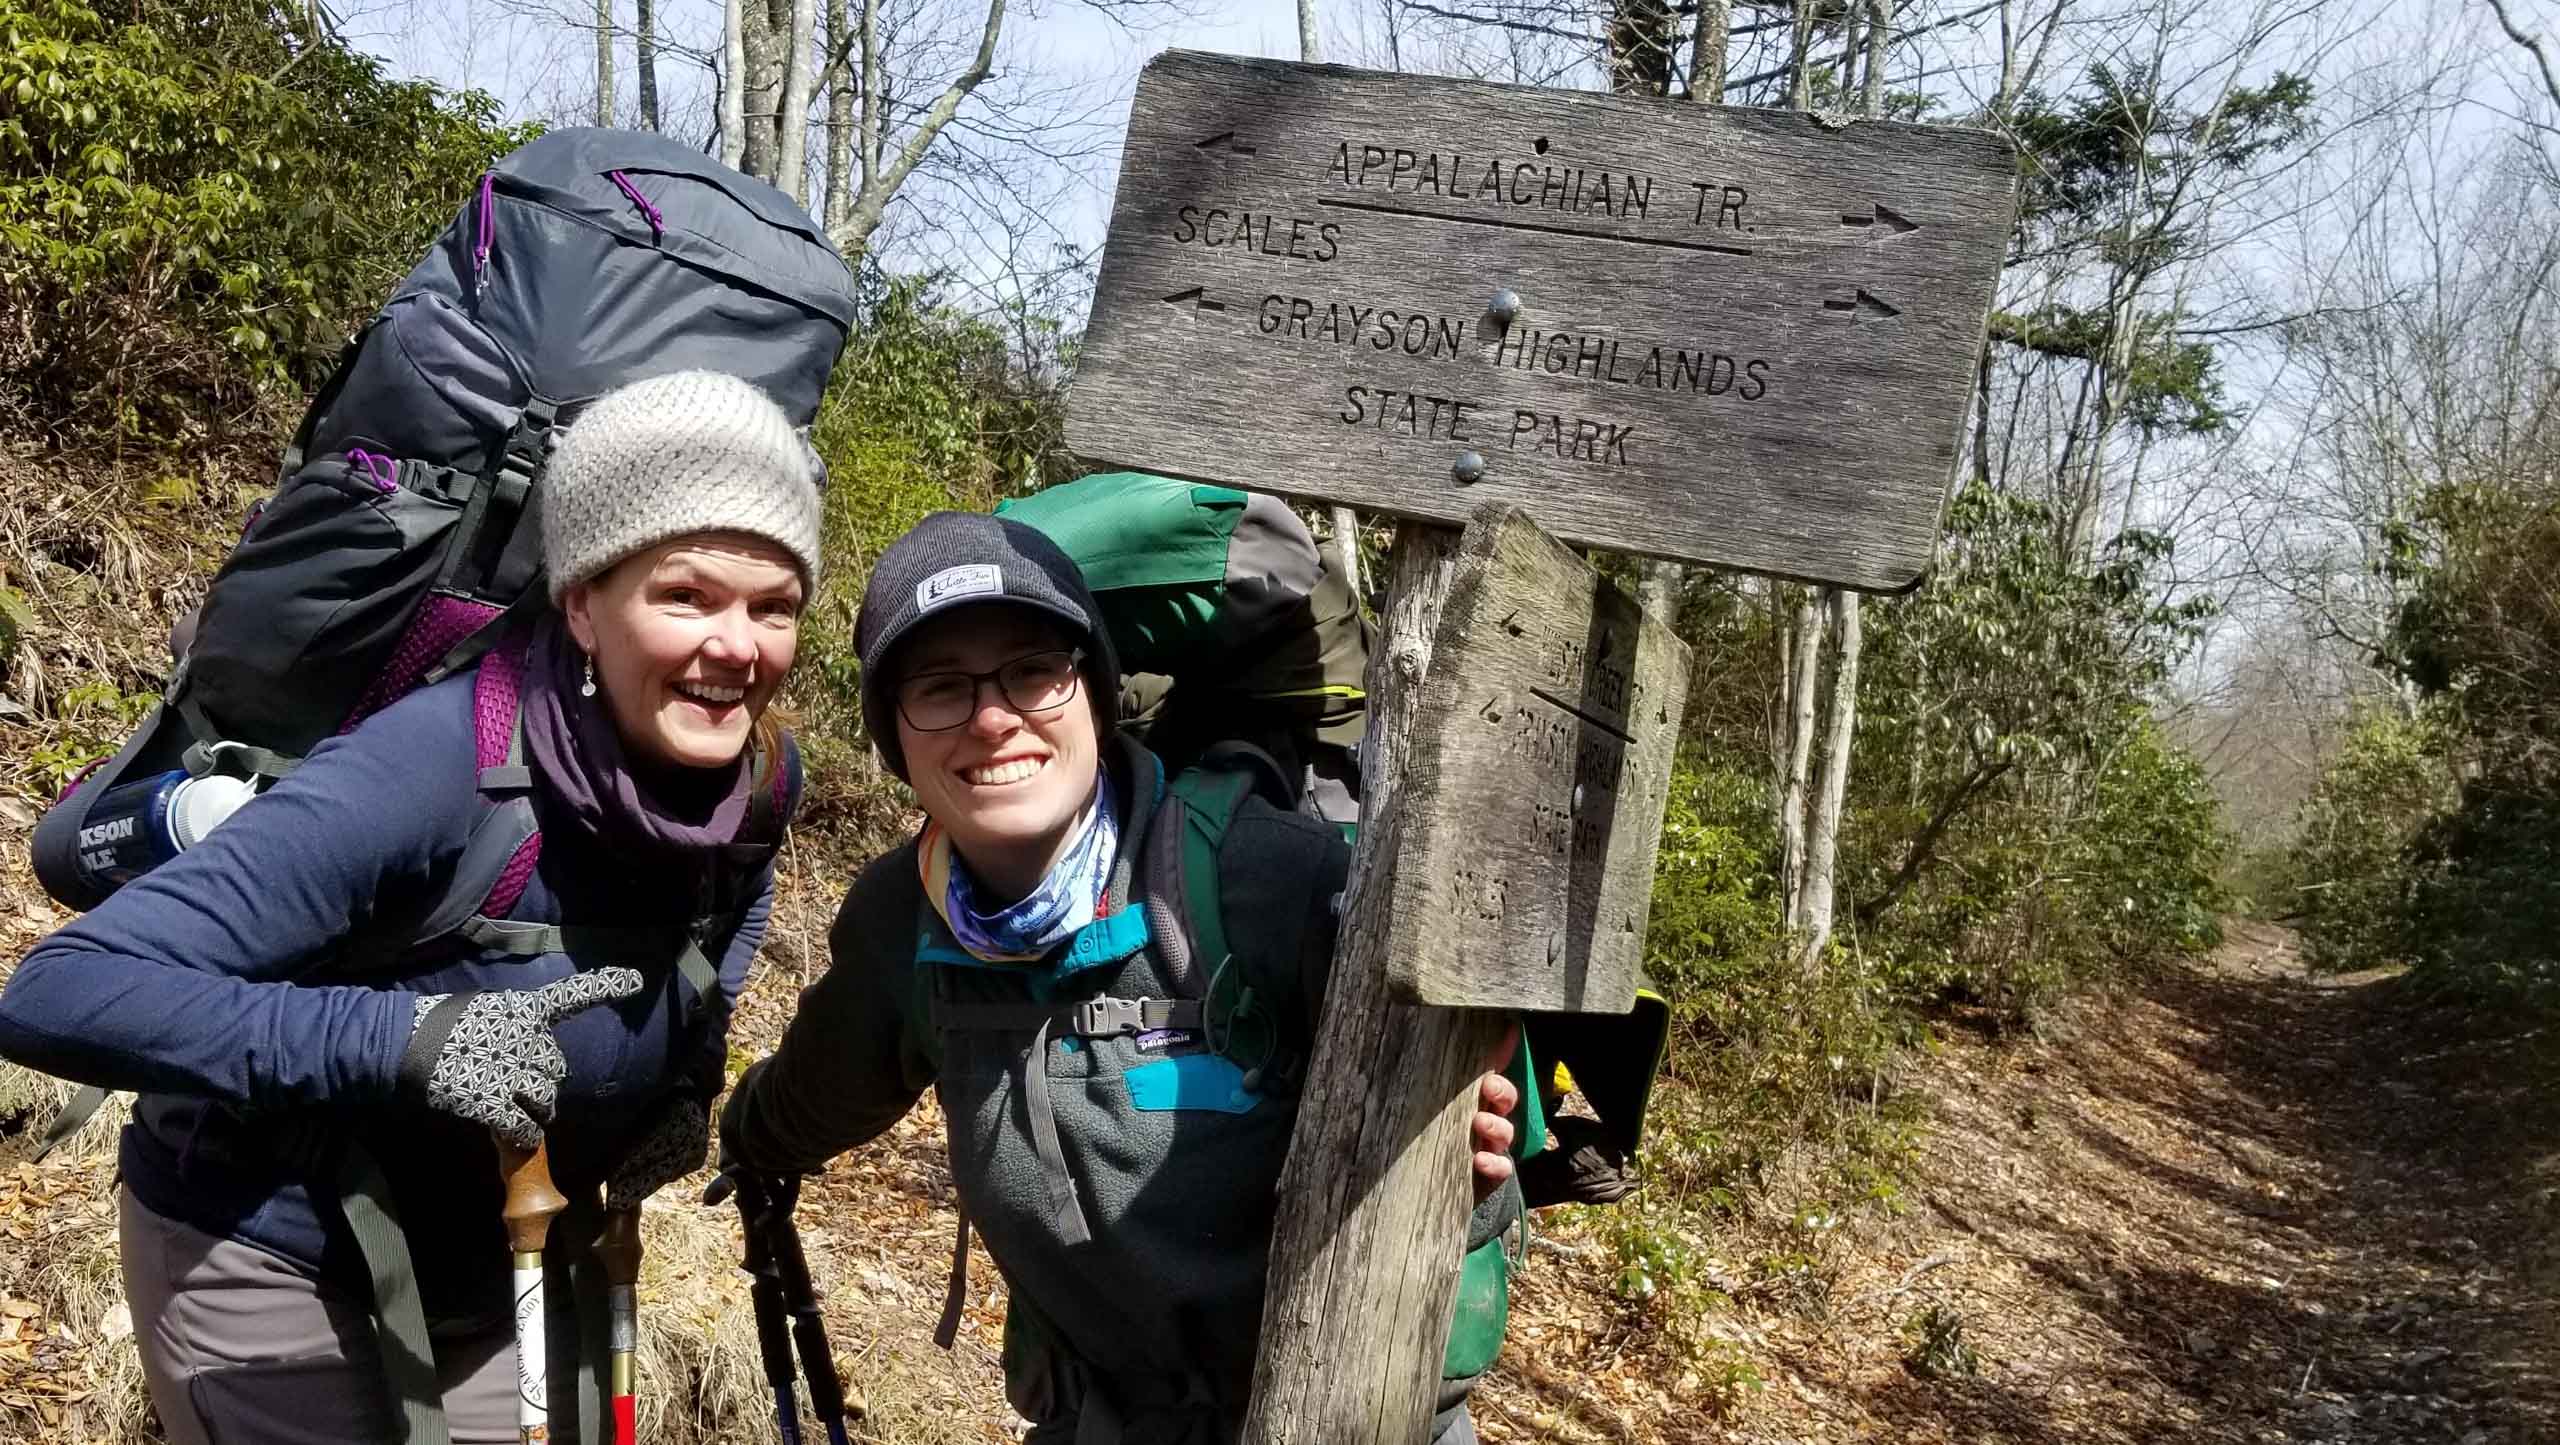 Two women with hiking gear, smiling next to a sign on a trail.